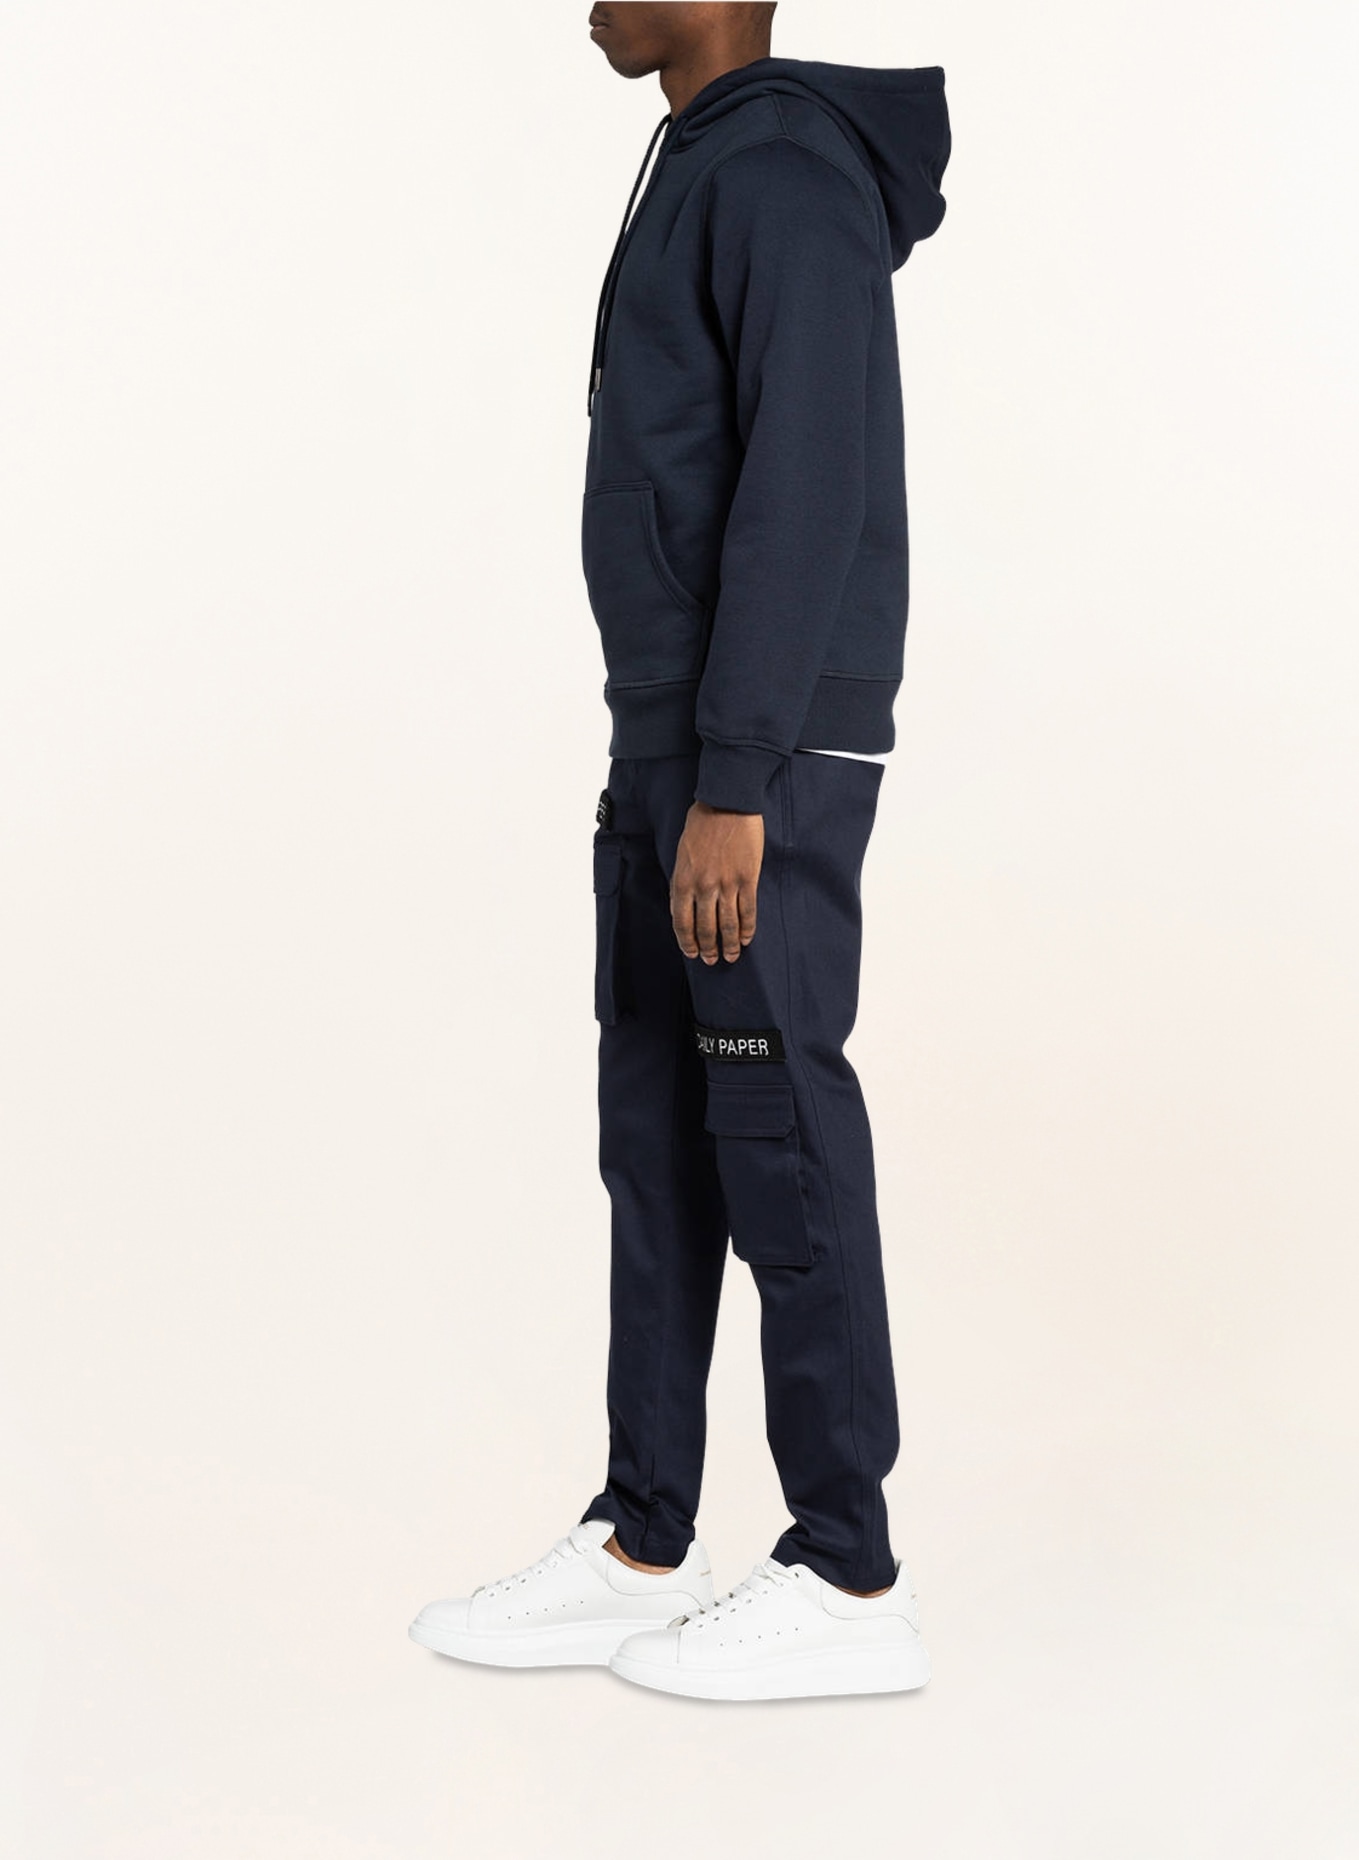 DAILY PAPER Cargo pants extra slim fit in dark blue